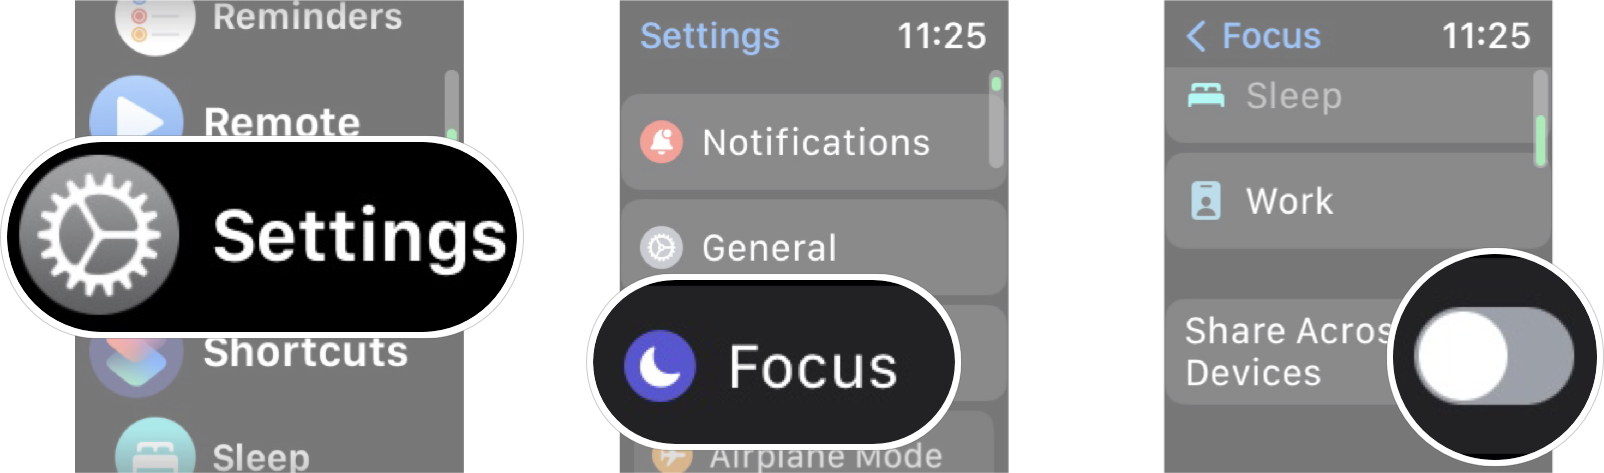 How To Enable Share Across Devices: Launch Settings, tap focus, and then tap the share across devices on/off switch to enable the feature.